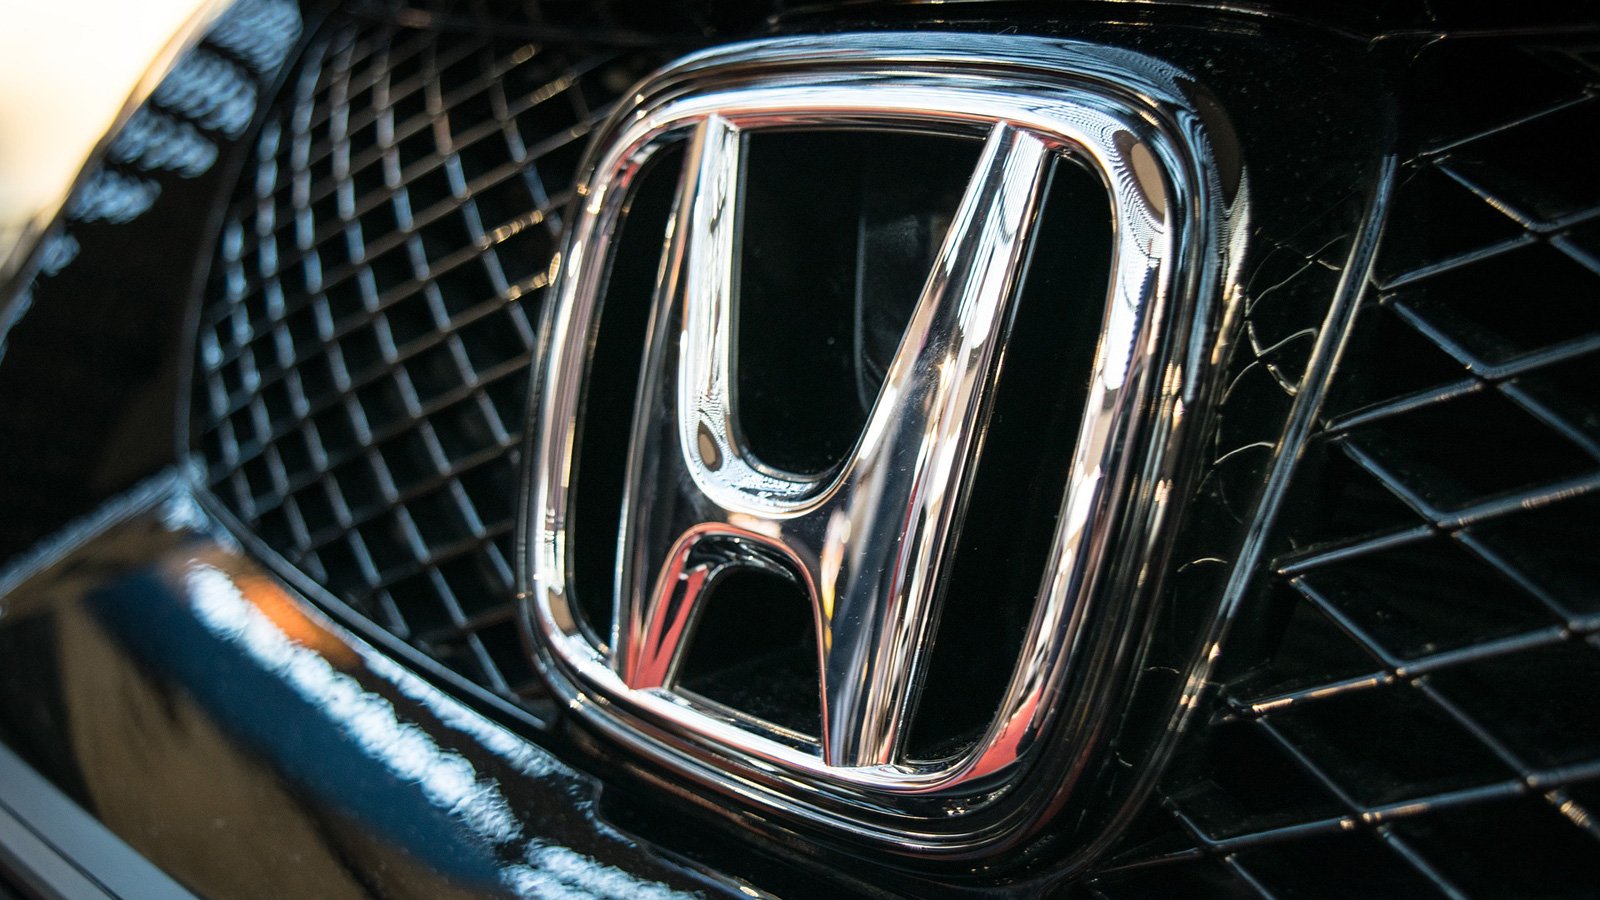 Honda, Acura cars hit by Y2K22 bugs rolling back time to 2002